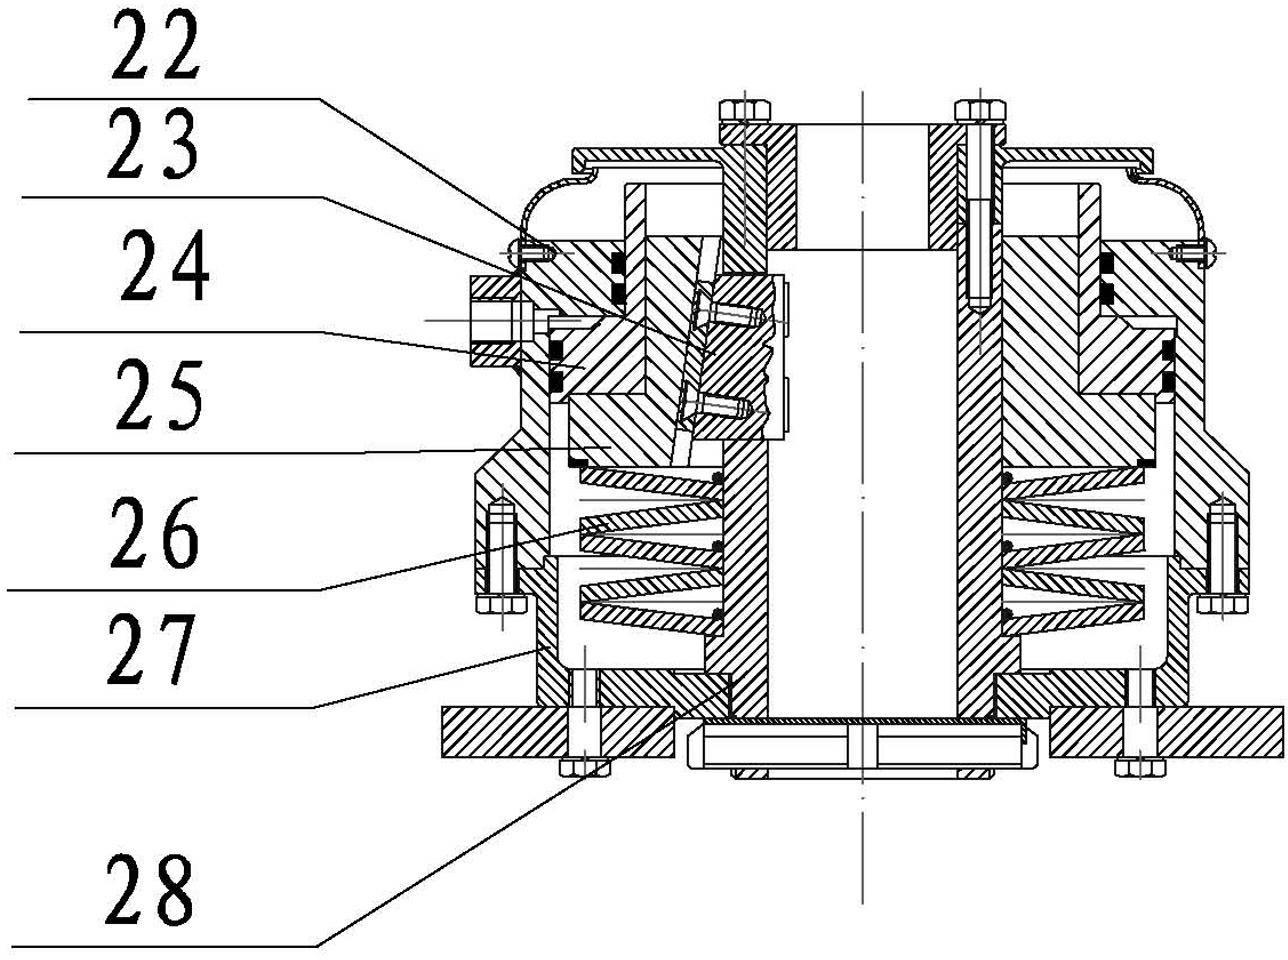 High-torque drilling machine with power-shifting gearbox